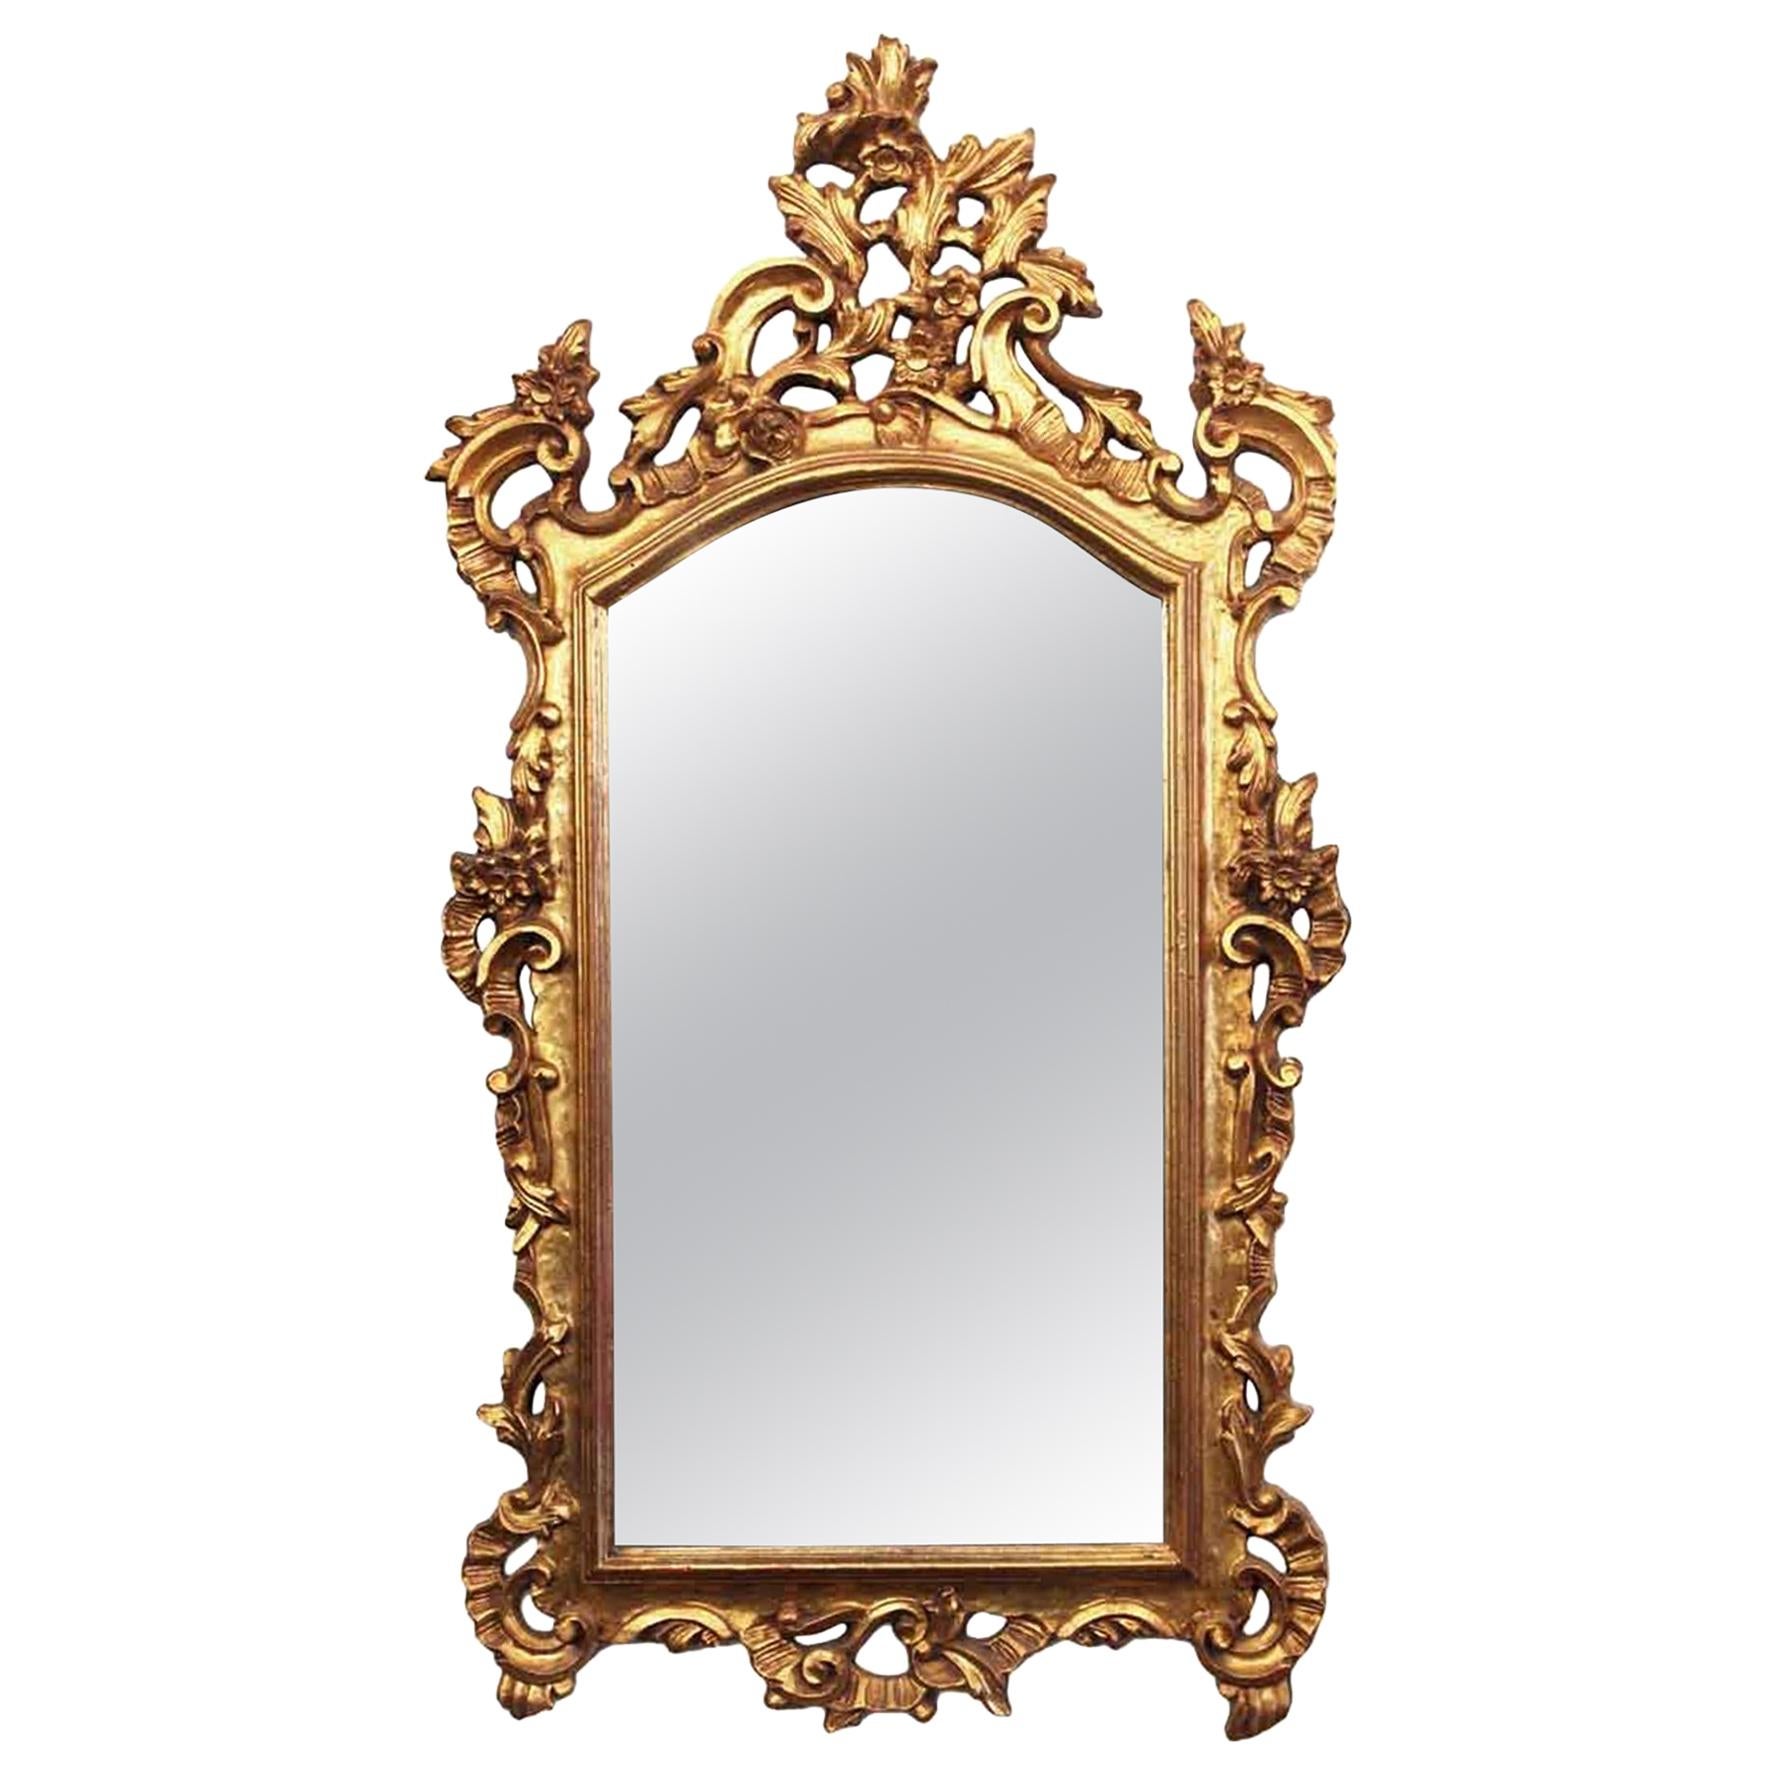 1910s Gold Gilt French Hand Carved Mirror with Ornate Details